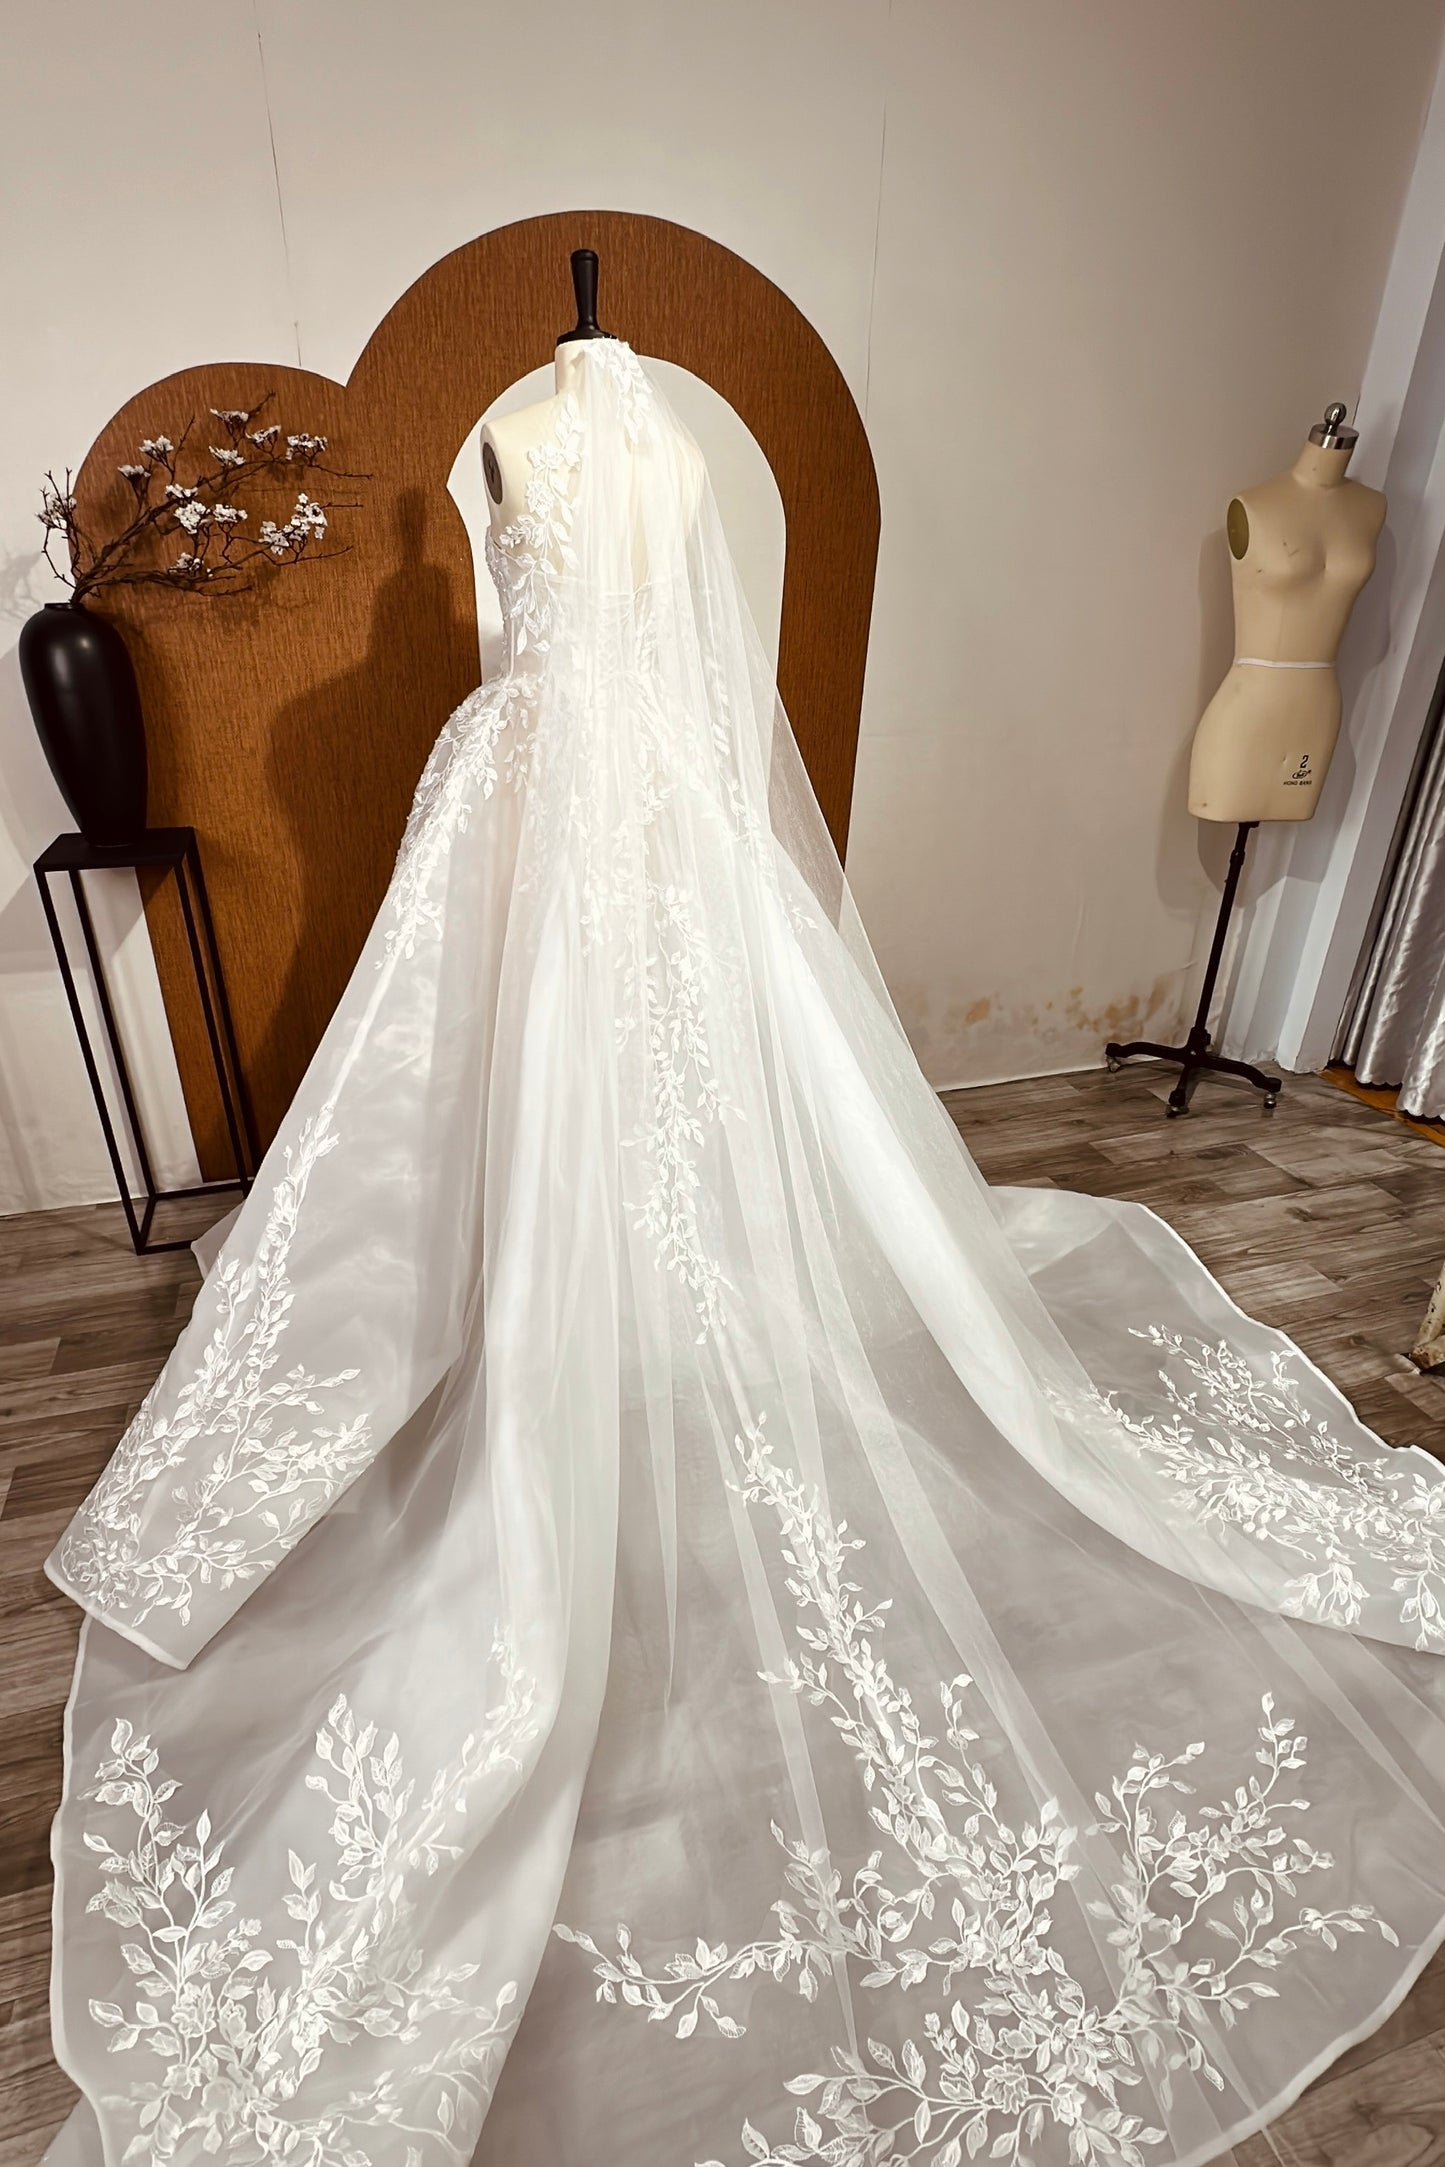 Gwen - Princess Ball Gown Wedding Dress with Floral Lace, Customized Wedding Dress Tailored to the Bride's Preferences.